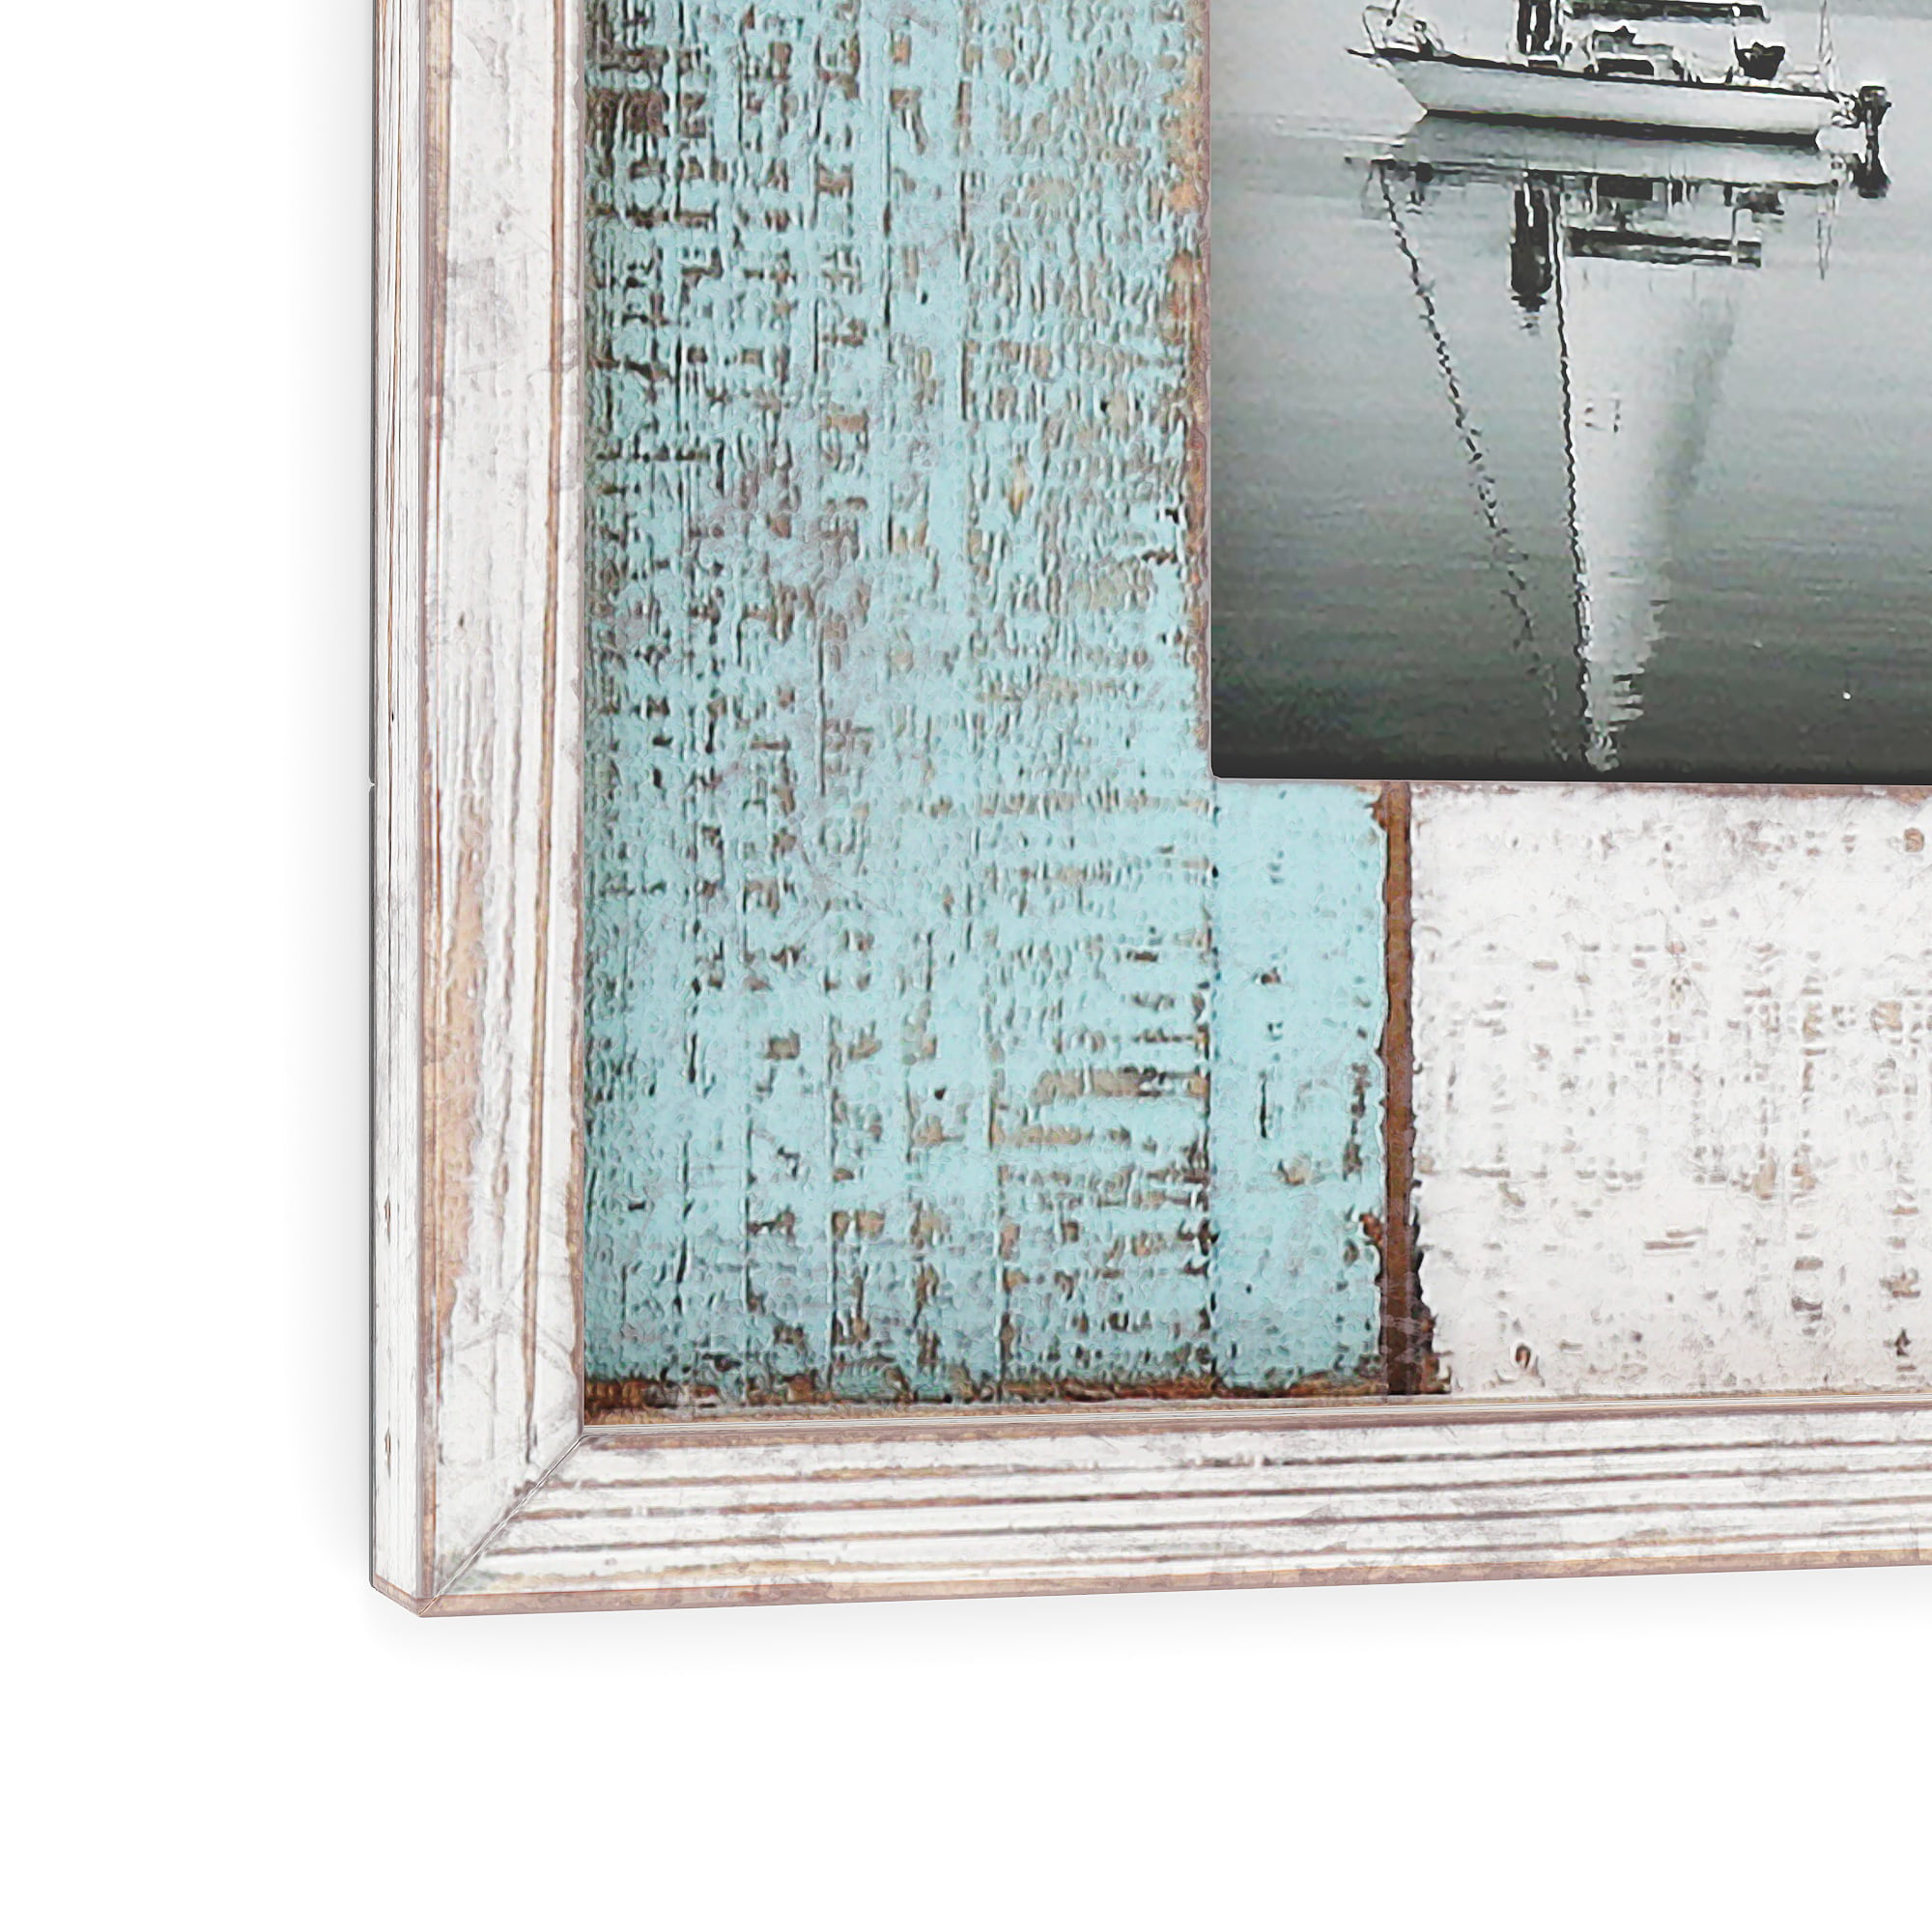 YesterDecor 4x6 Rustic Picture Frames - Set of 2 White Wood Picture Frames  - Farmhouse Style Distressed Wedding Picture Frame - 4x6 Photo Frame 